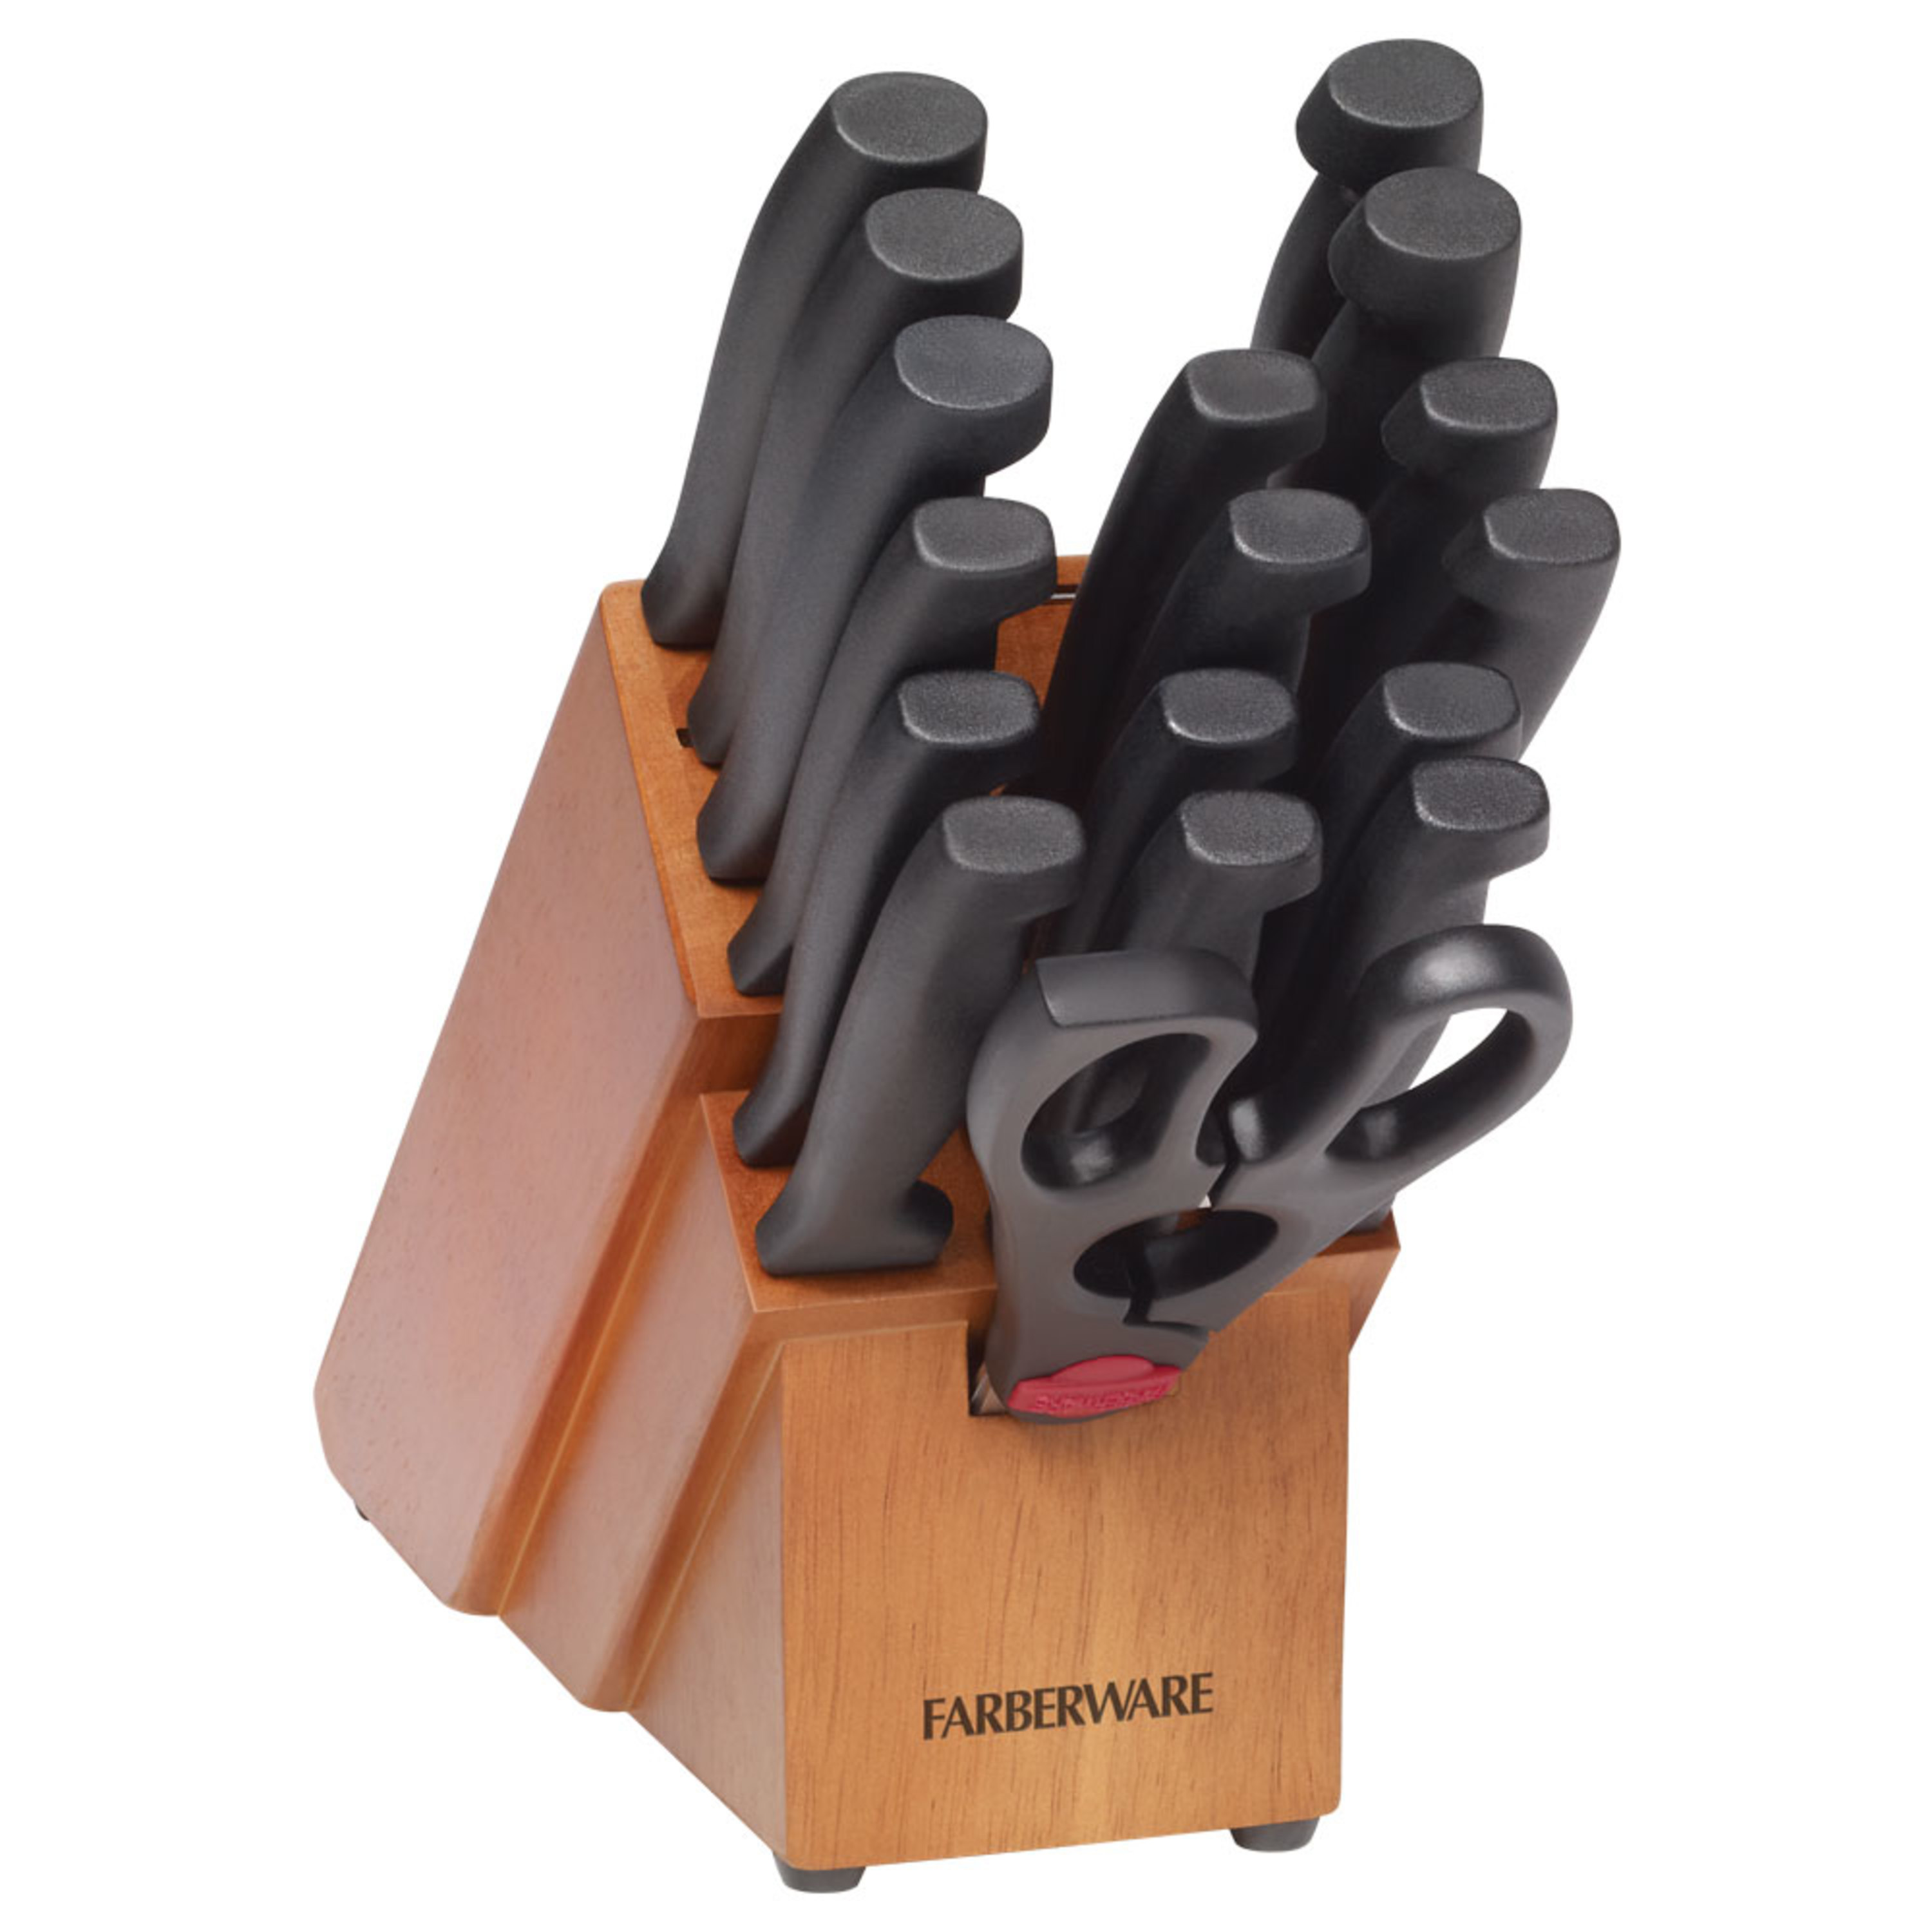 Farberware 18-Piece Never Needs Sharpening Stainless Steel Knife Set with Block Natural Wood - image 1 of 16